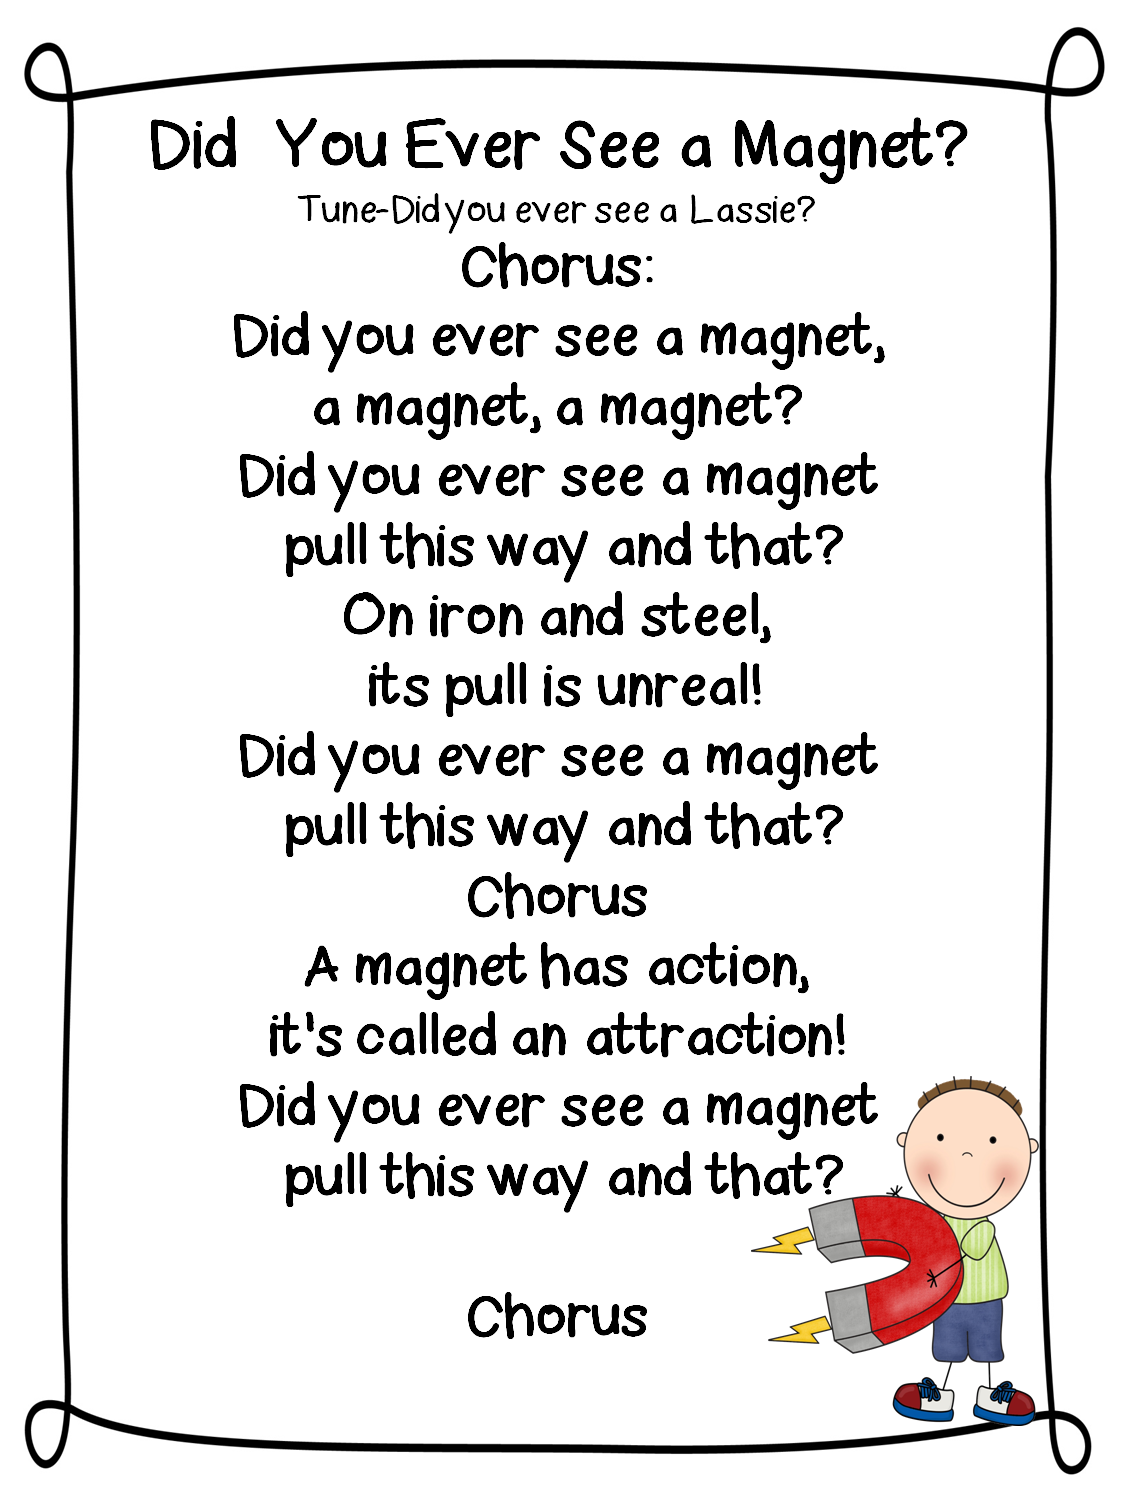 Have you ever heard the Magnet Song? | Dowling Magnets